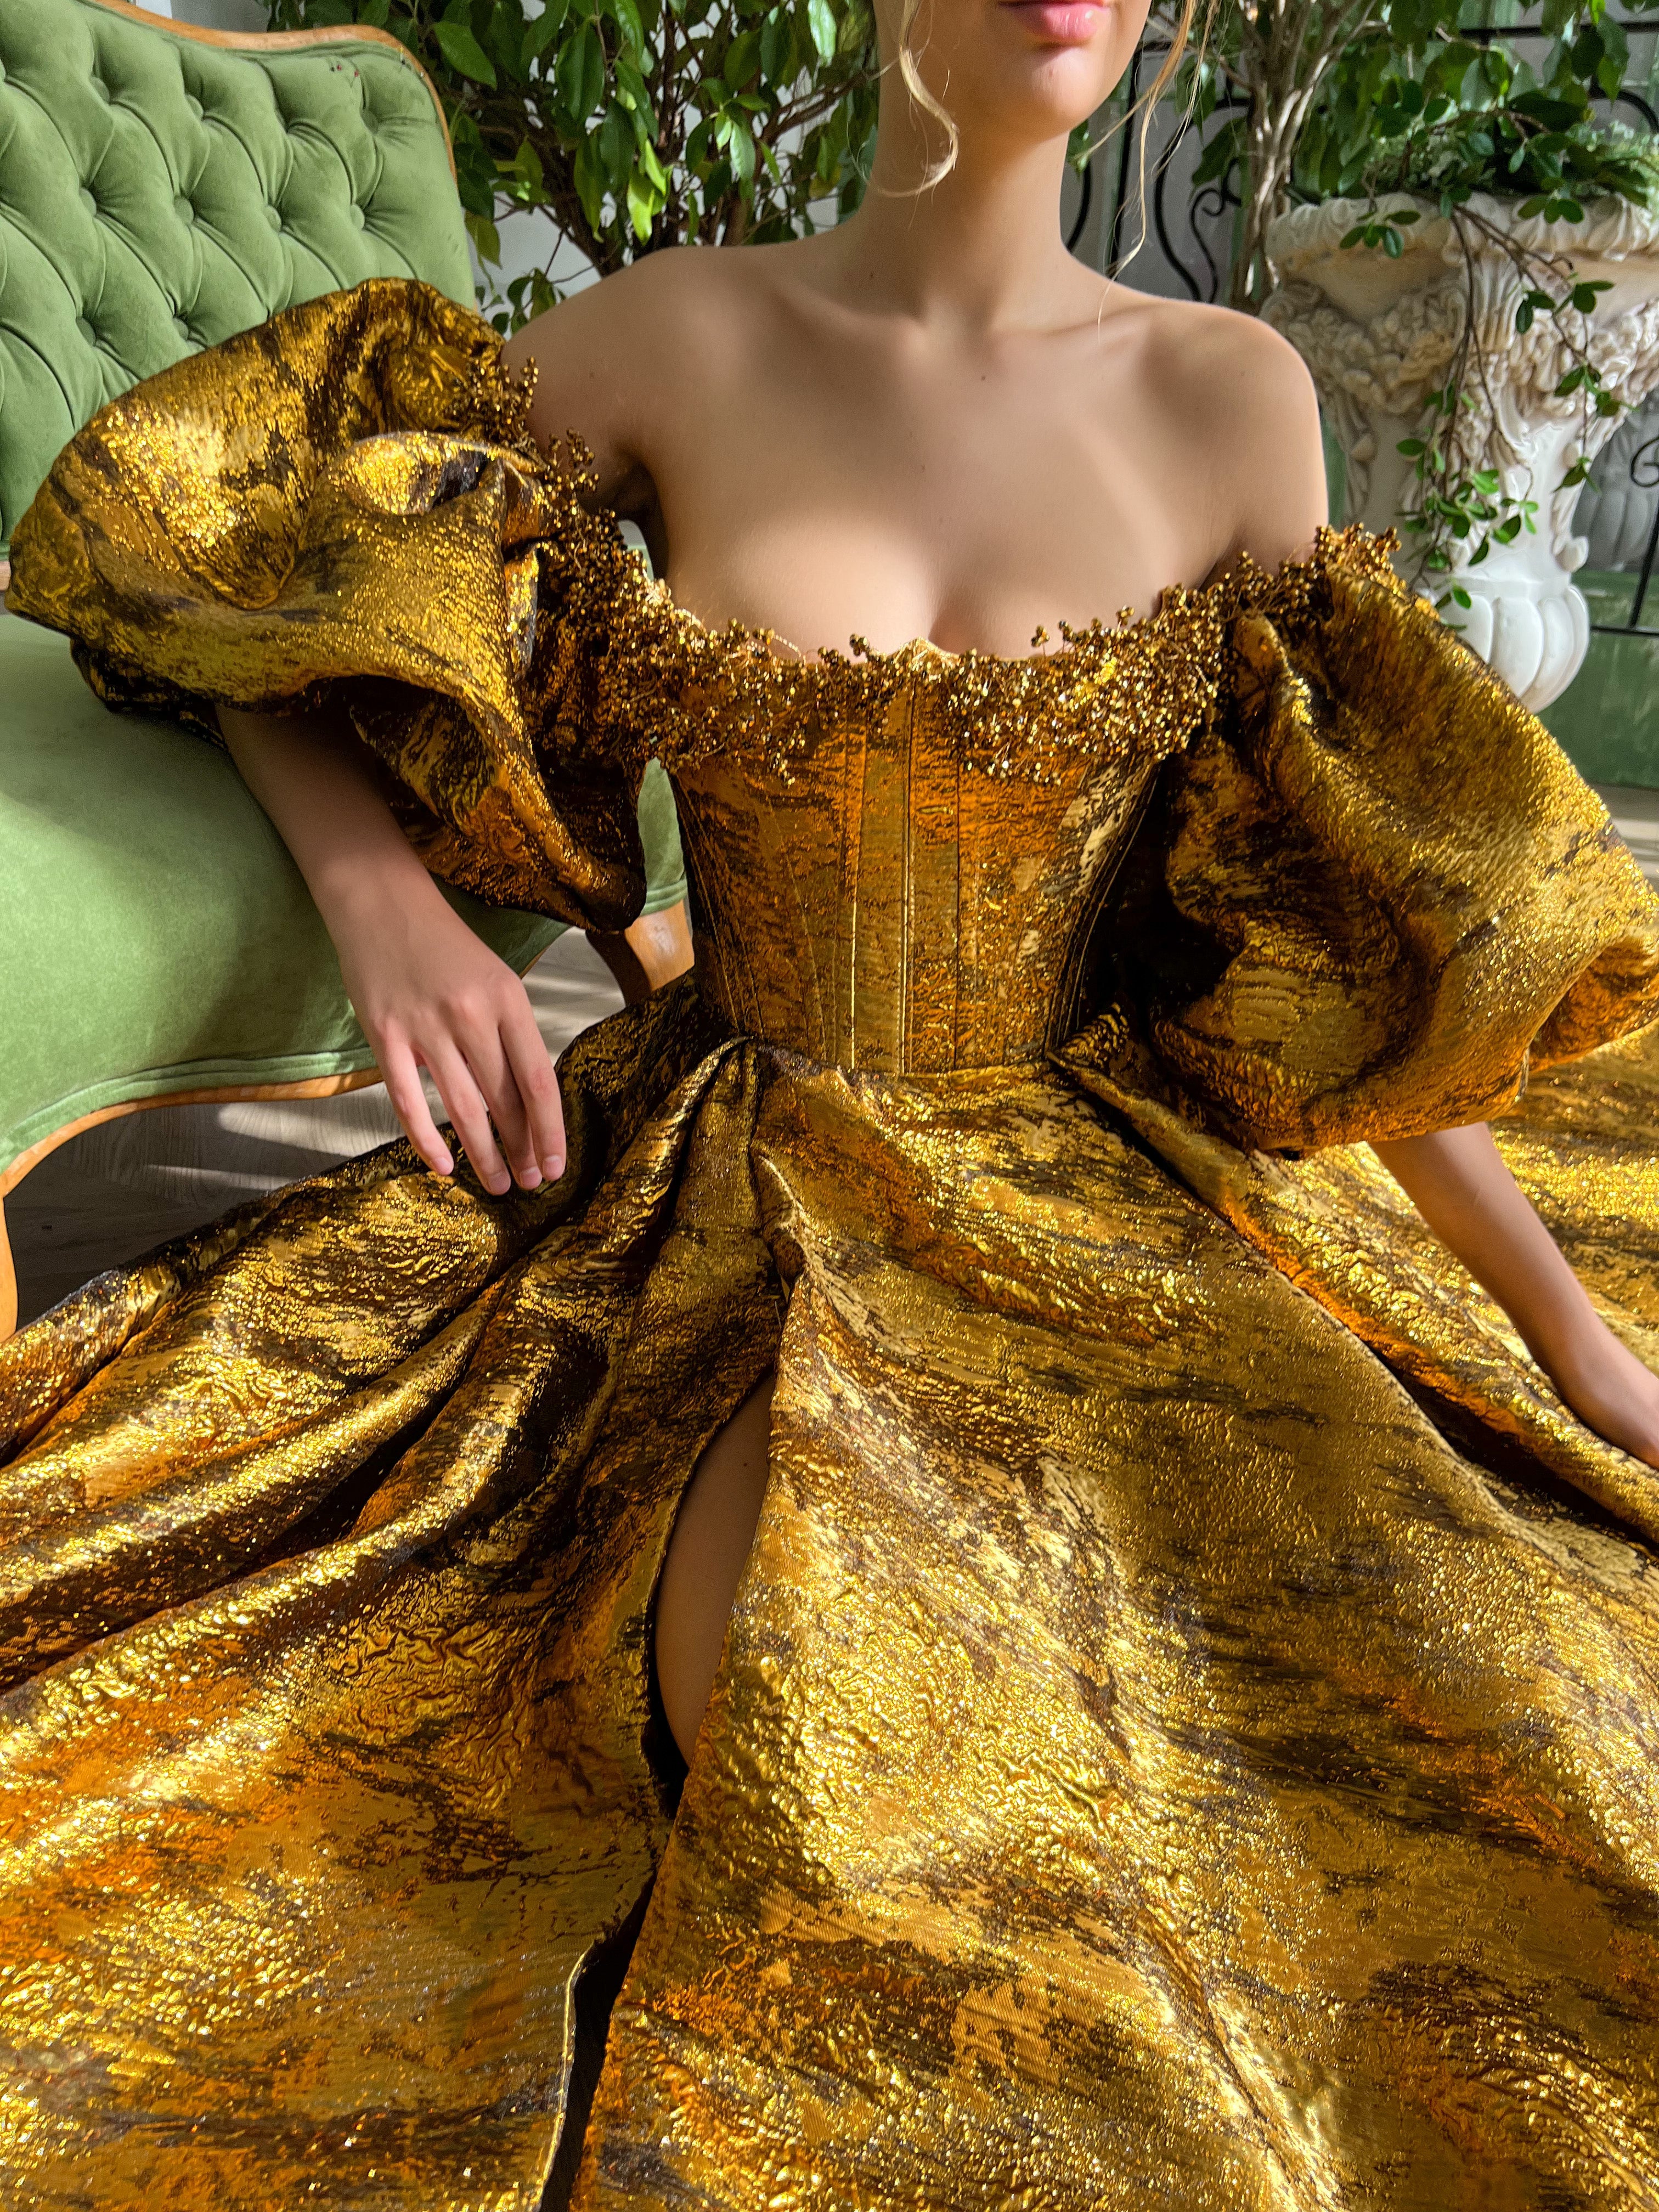 Gold A-Line dress with off the shoulder sleeves and embroidery